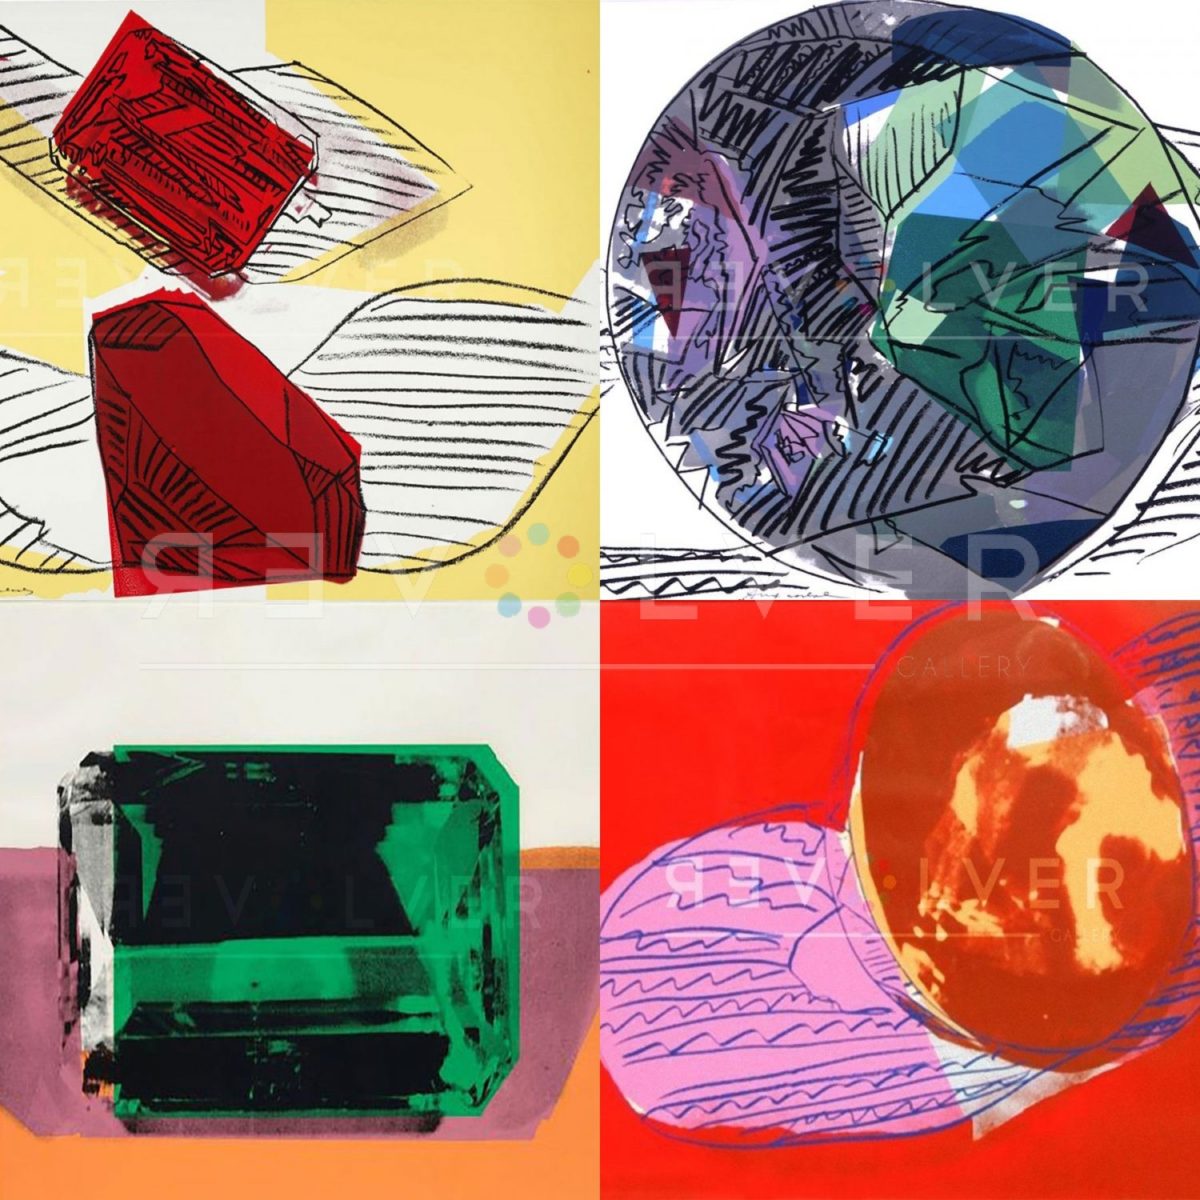 Andy Warhol Gems. Four screenprints from the Gems portfolio with the Revolver Gallery watermark.